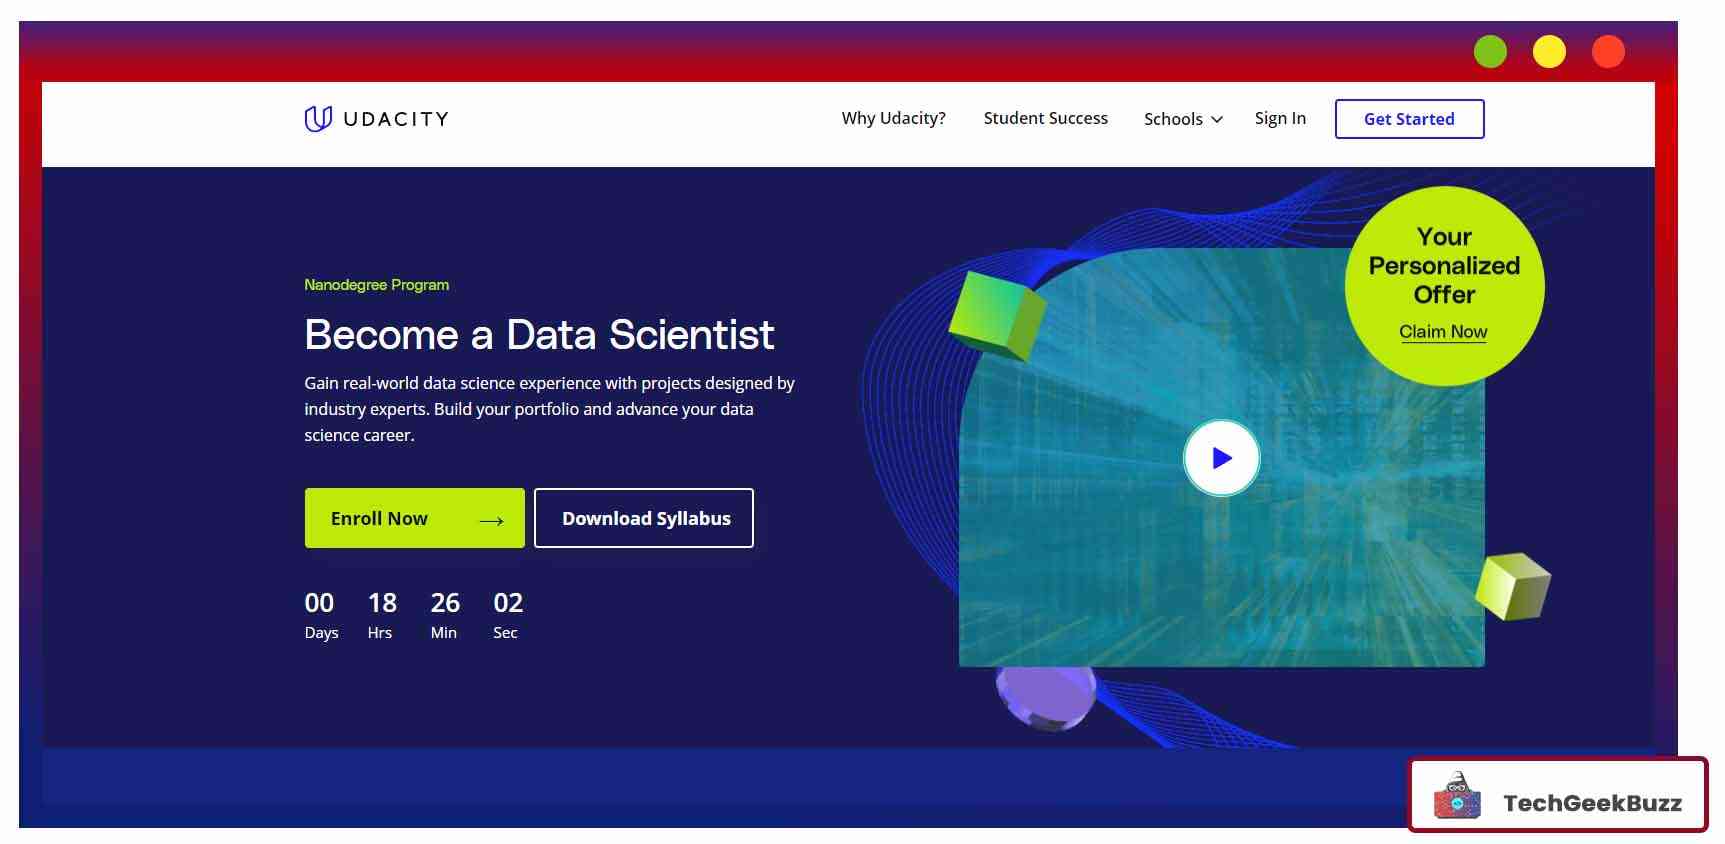 Become a Data Scientist